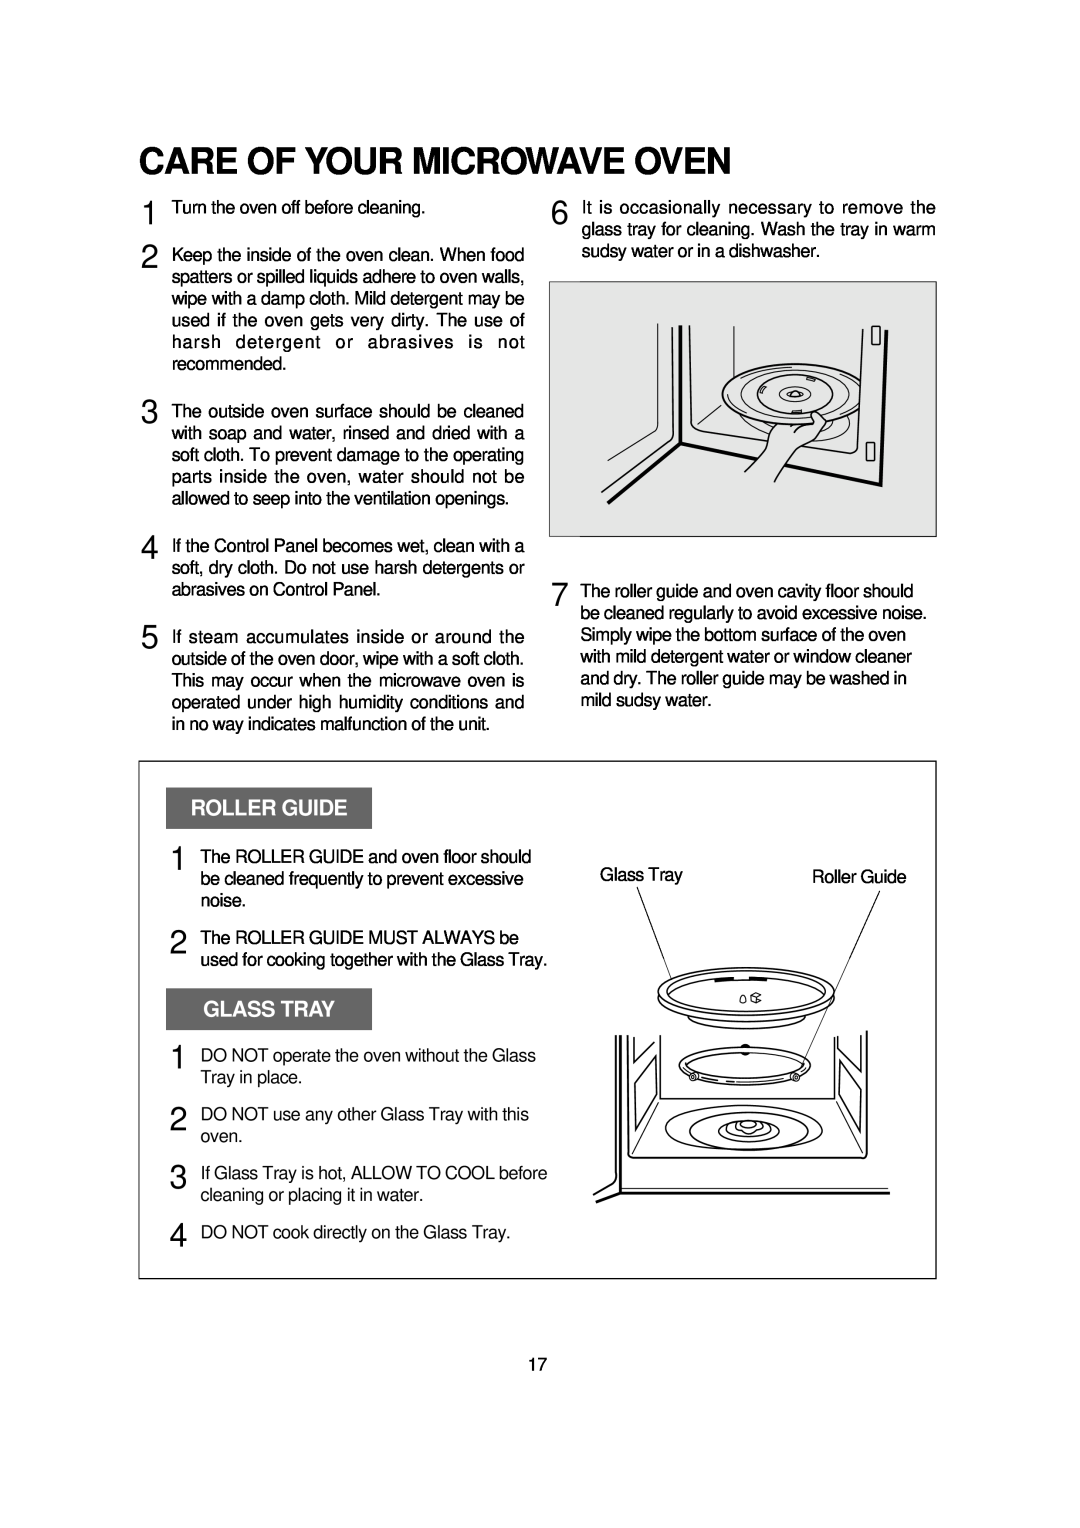 Magic Chef MCB1110B instruction manual Care Of Your Microwave Oven, Roller Guide, Glass Tray 